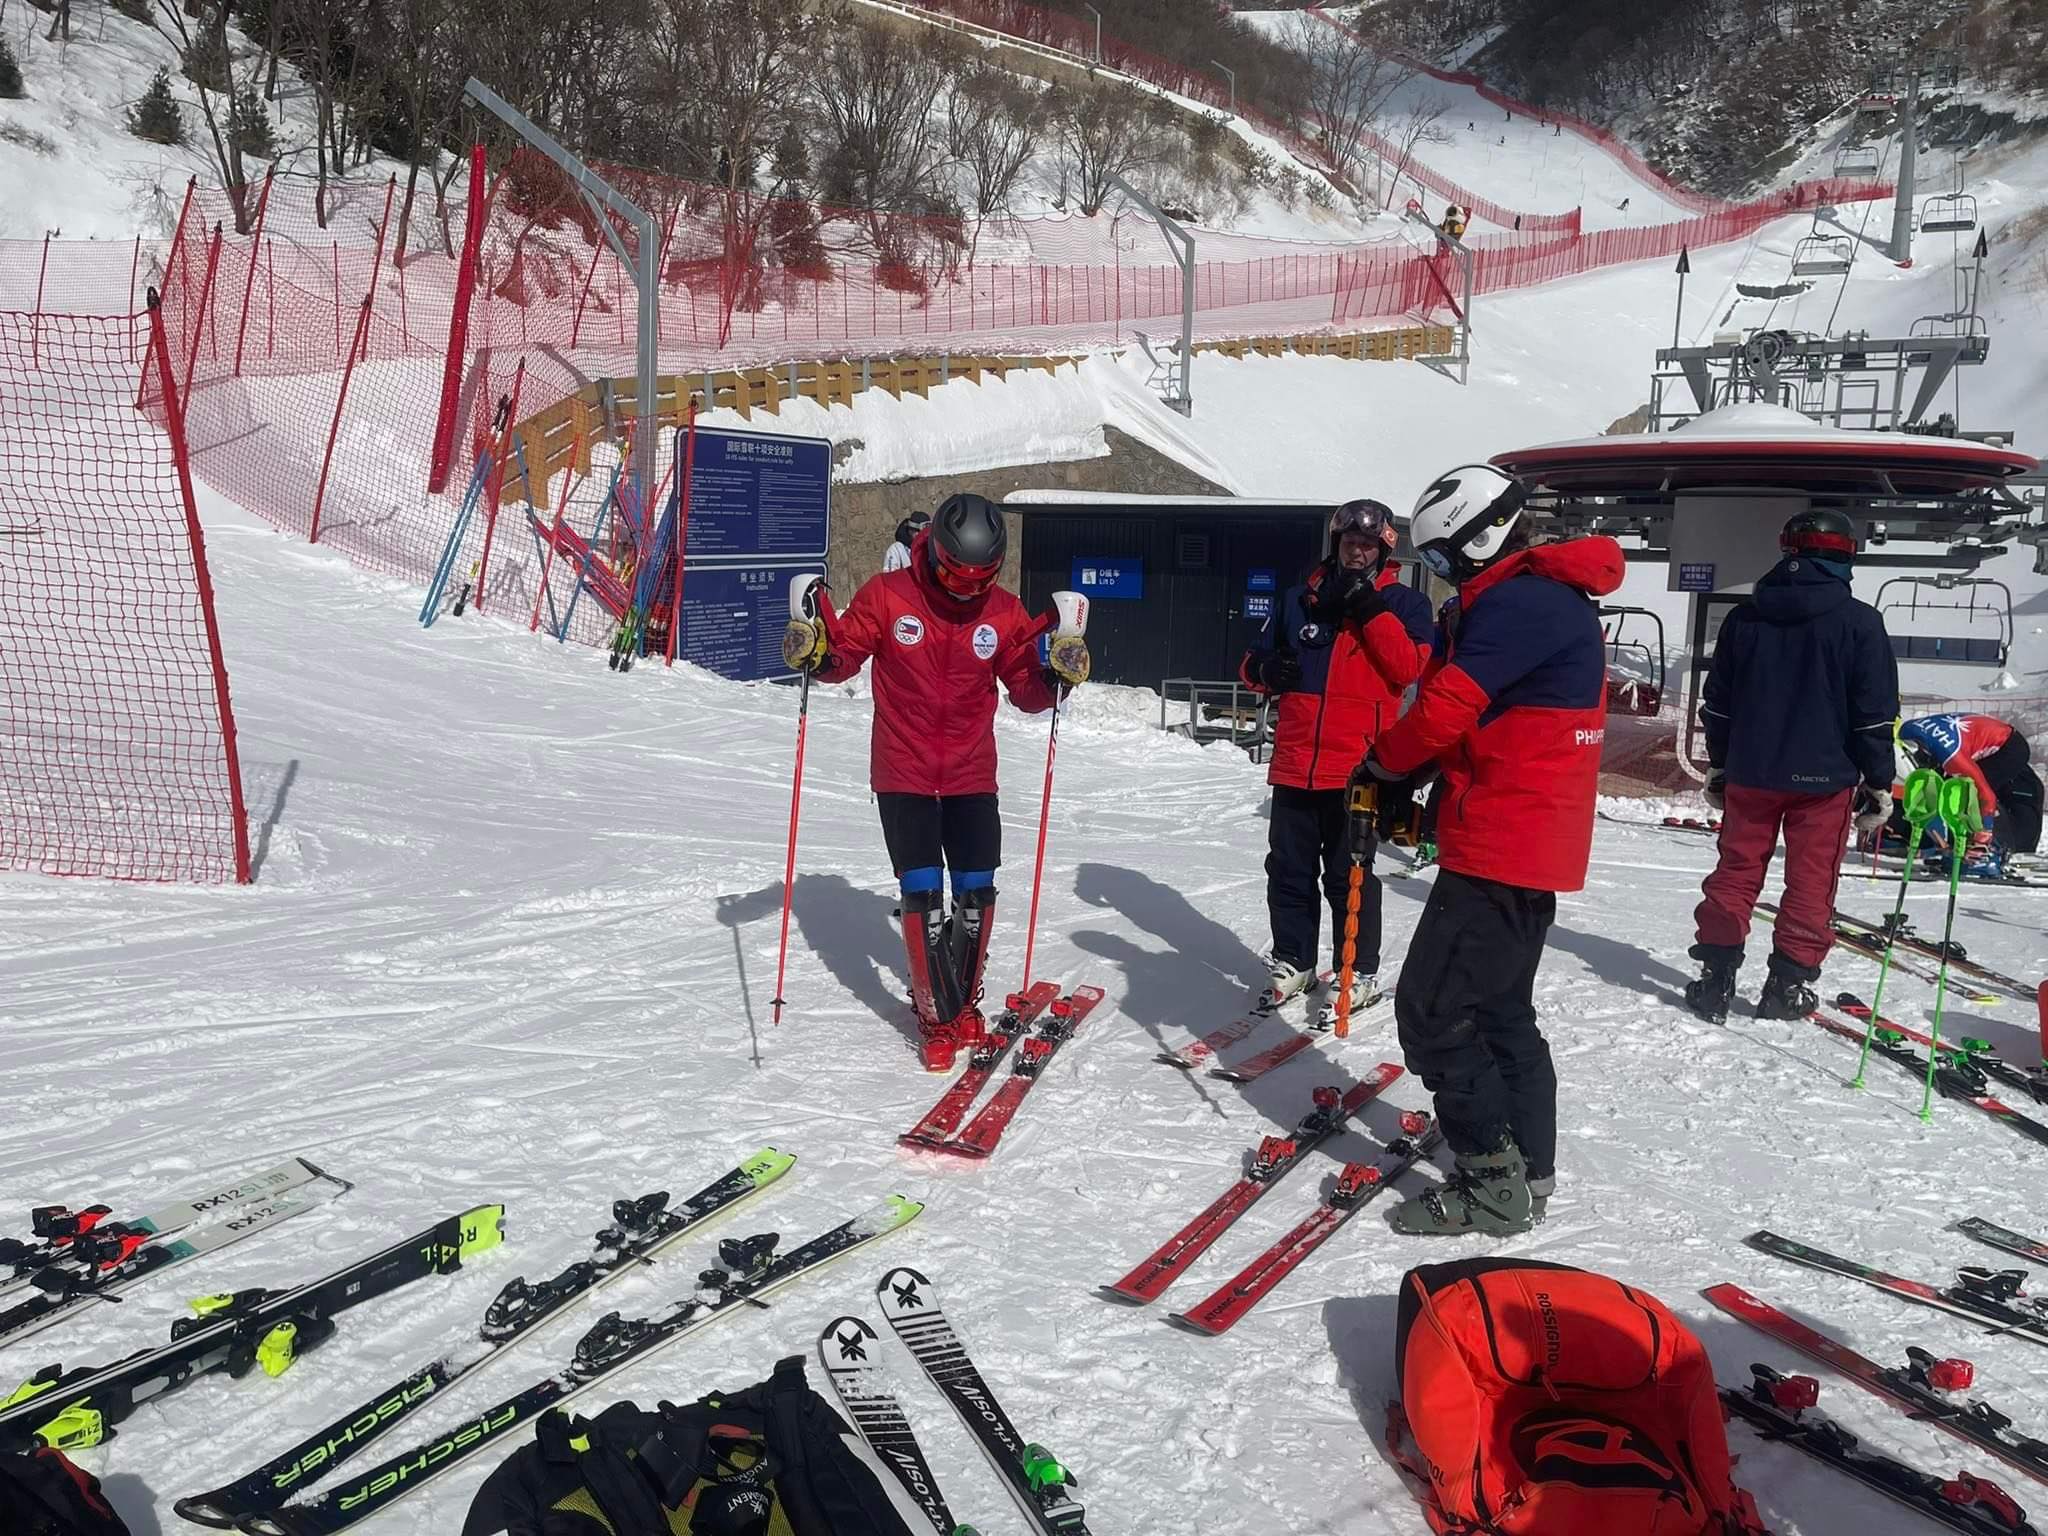  Asa Miller (left) preparing for his last day of ski training for Wednesday’s slalom event in the 2022 Beijing Olympic Winter Games here at the National Alpine Skiing Centre.